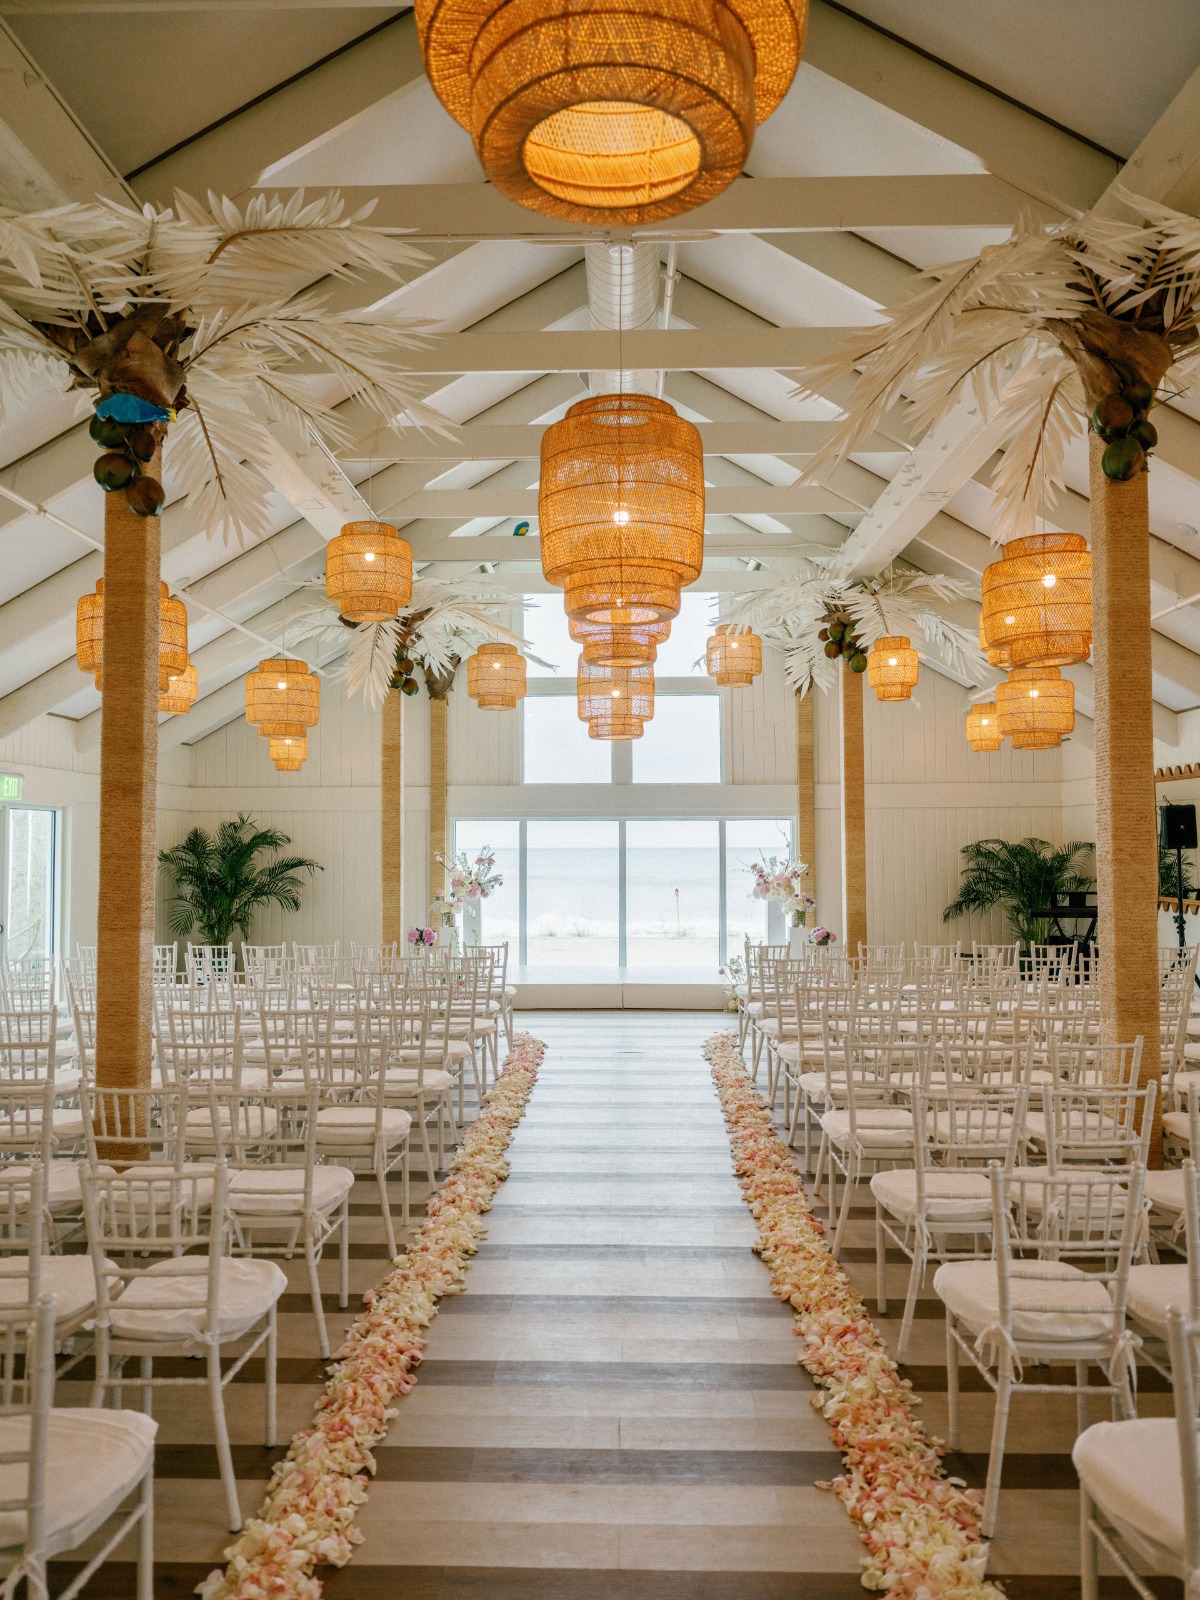 Ceremony room with rattan light fixtures and rose petals lining the aisle